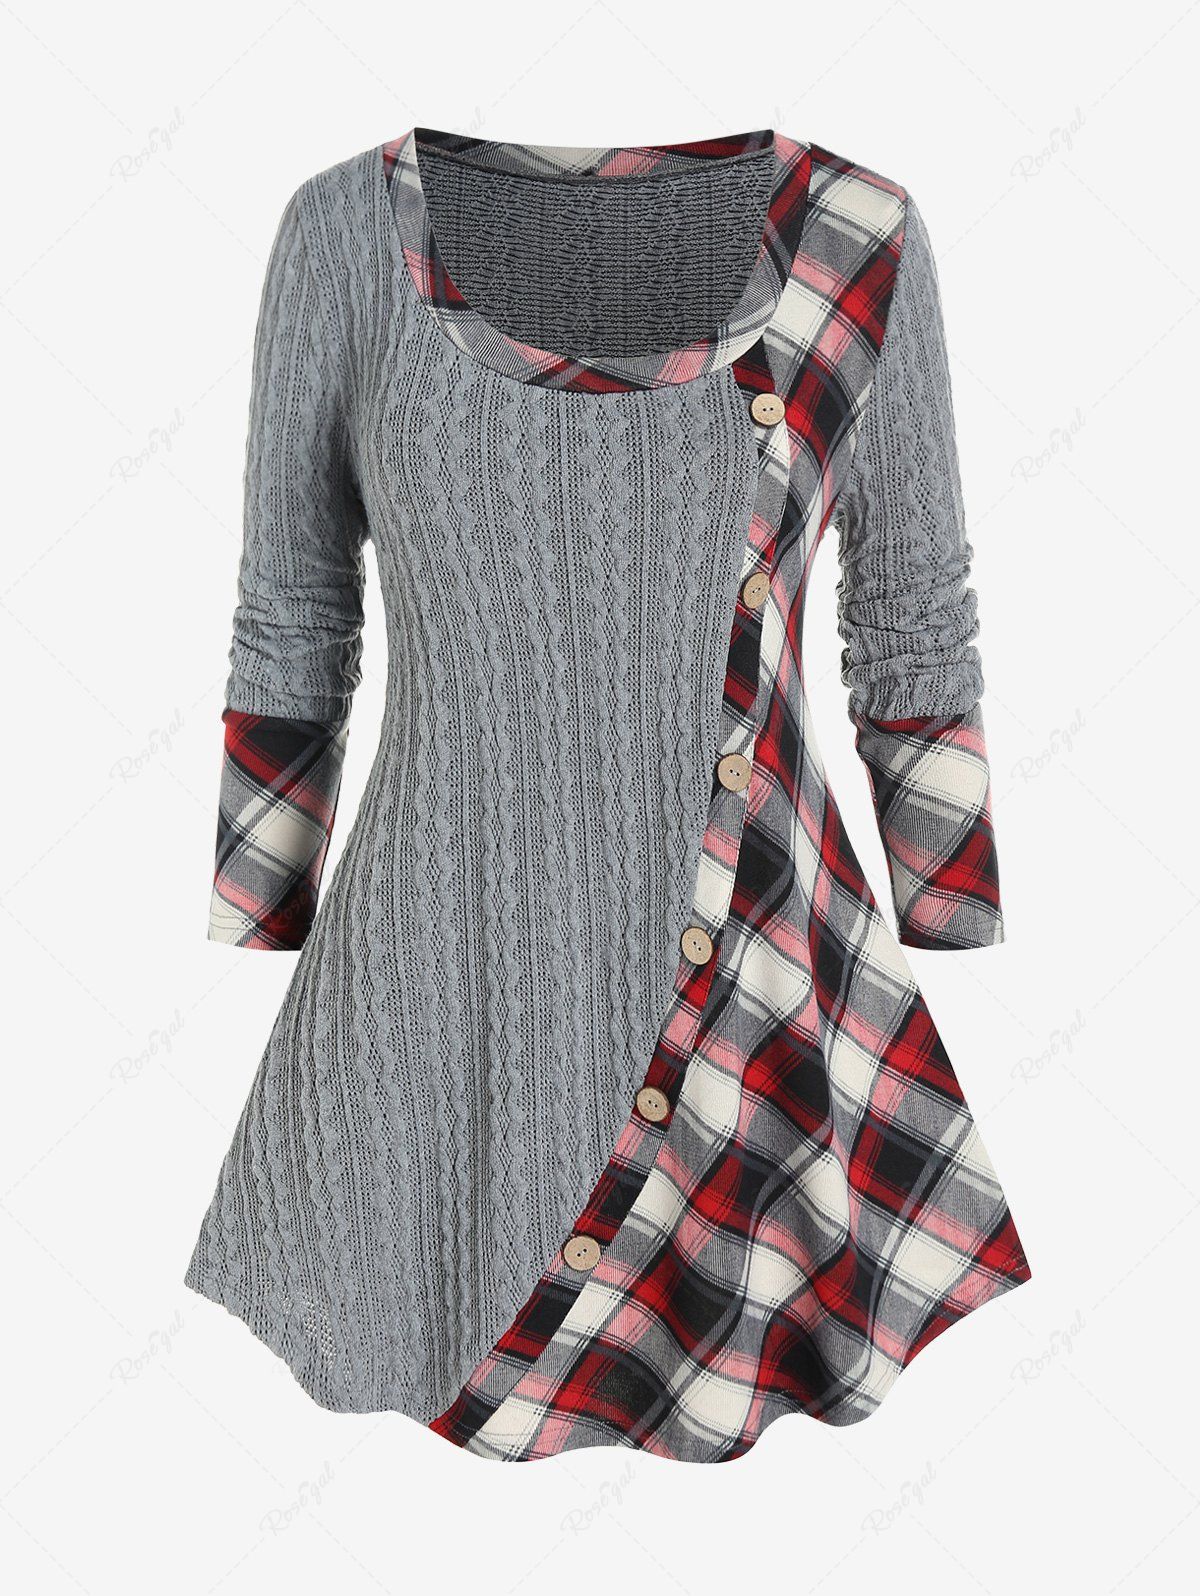 New Plus Size Mixed Media Plaid Cable Knit Tee  